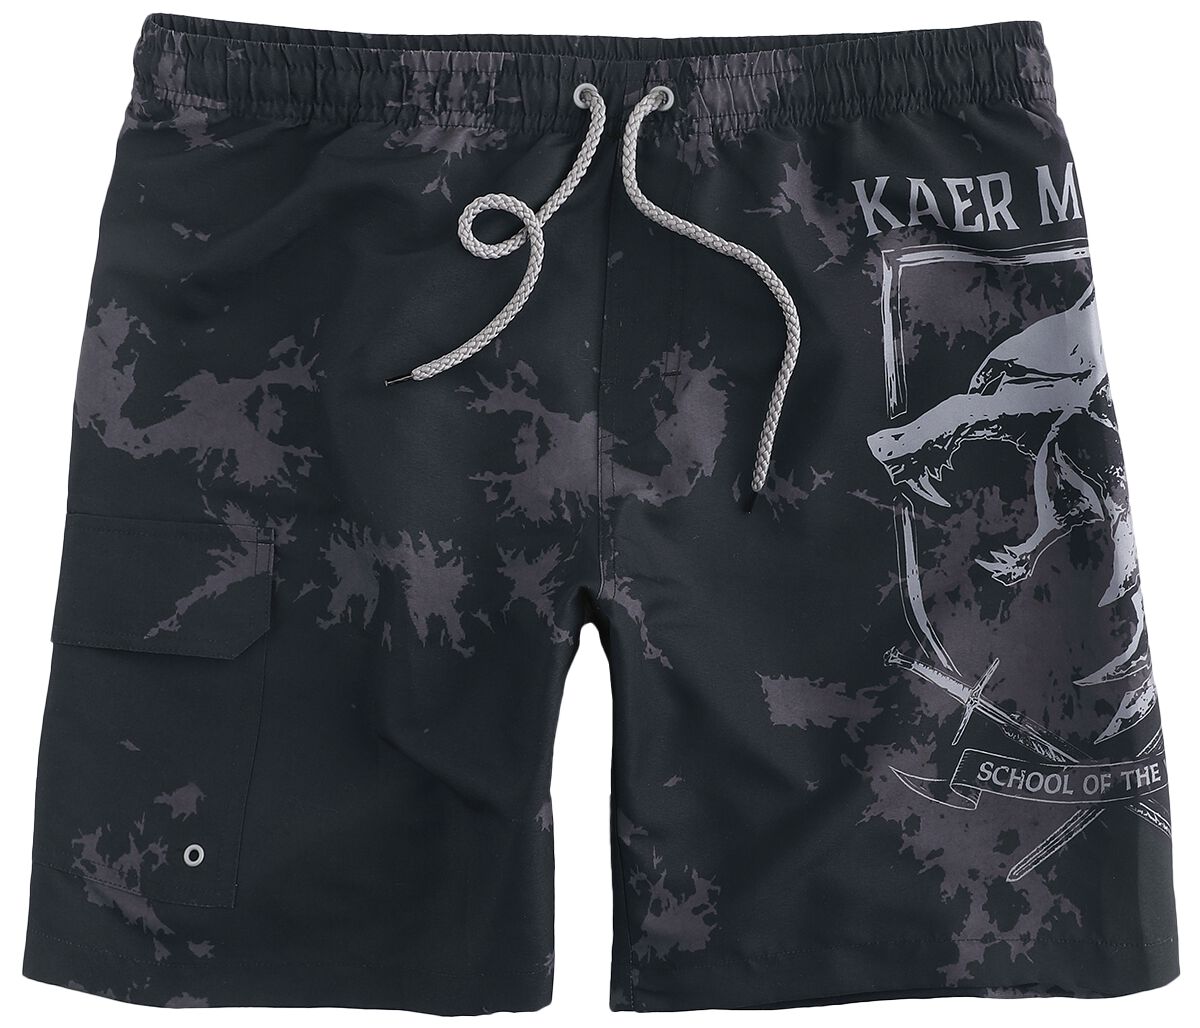 The Witcher The Witcher Badeshort multicolor in M